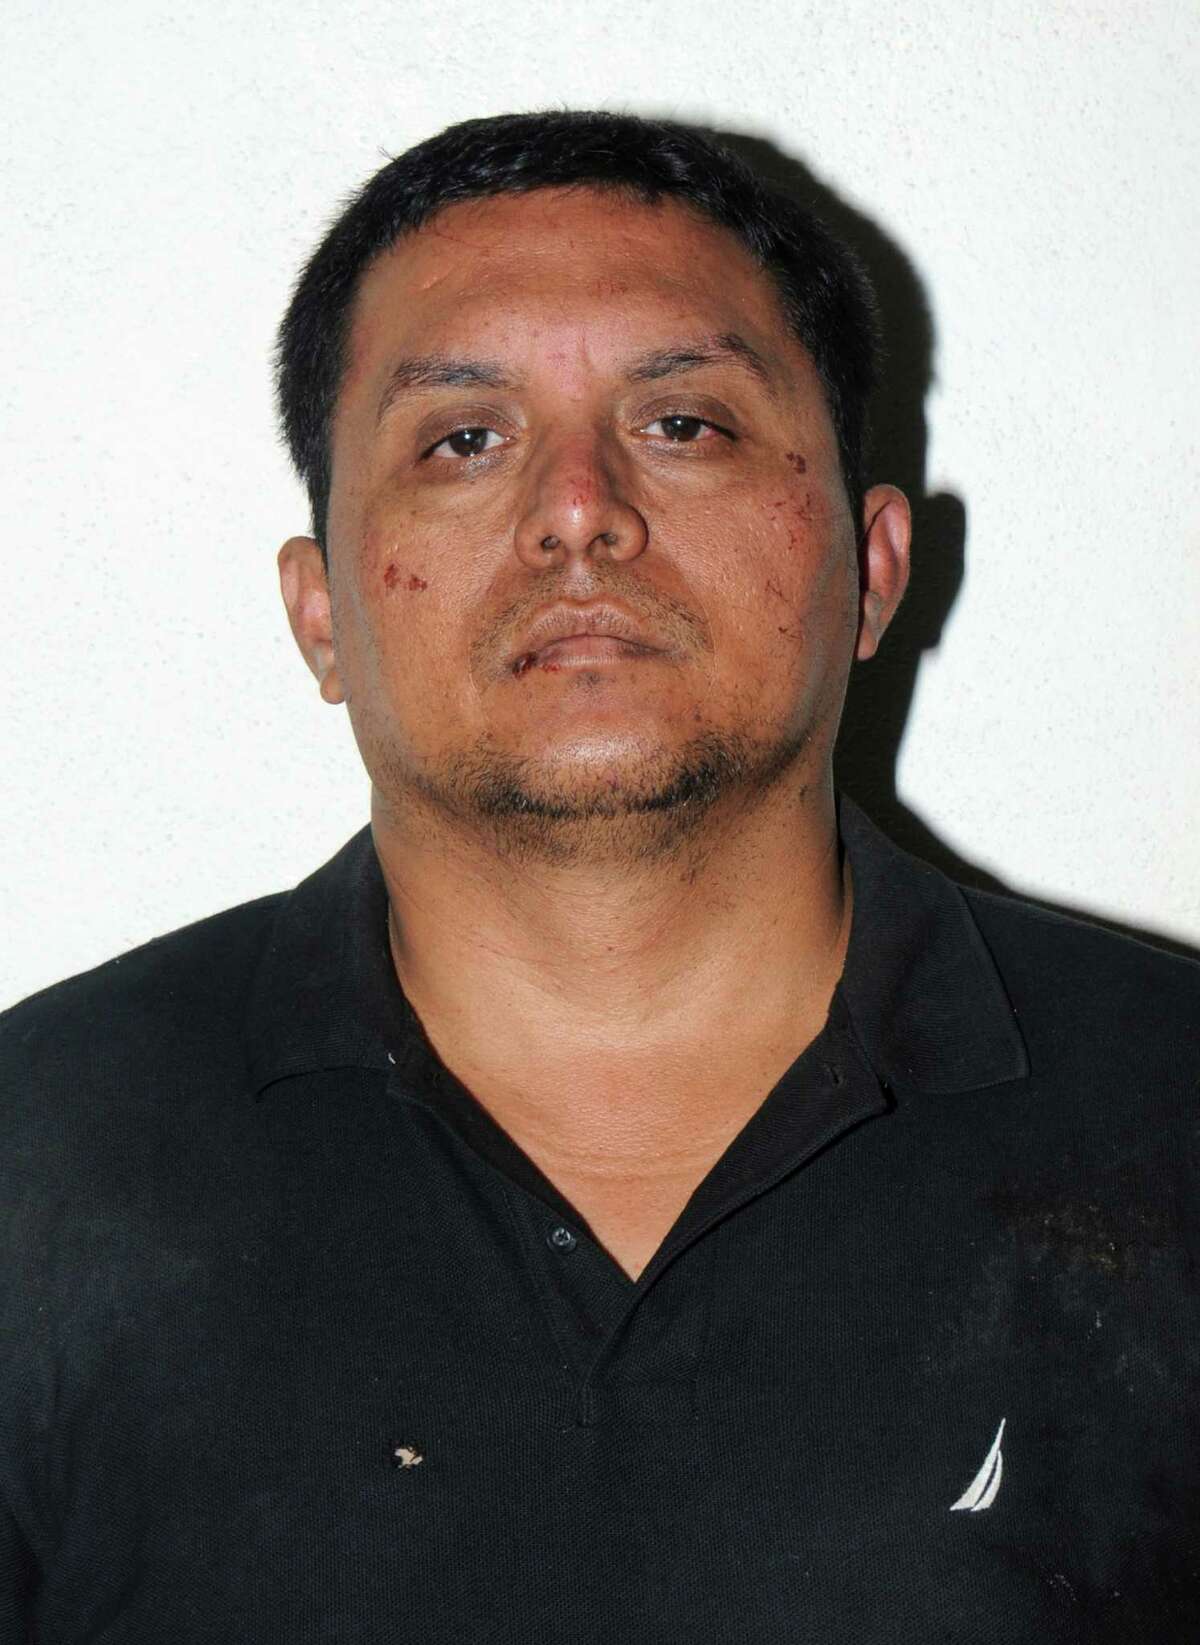 In this handout photo released by the Mexican Navy SEMAR on July 16, 2013, a photo of Miguel Angel Trevino Morales after he was captured near the Texas border. The capture of Trevino, the leader of the Zetas drug cartel, was a retort from Mexico's government to questions over whether it would go after top organized crime leaders. (Mexican Navy SEMAR, via New York Times) -- EDITORIAL USE ONLY